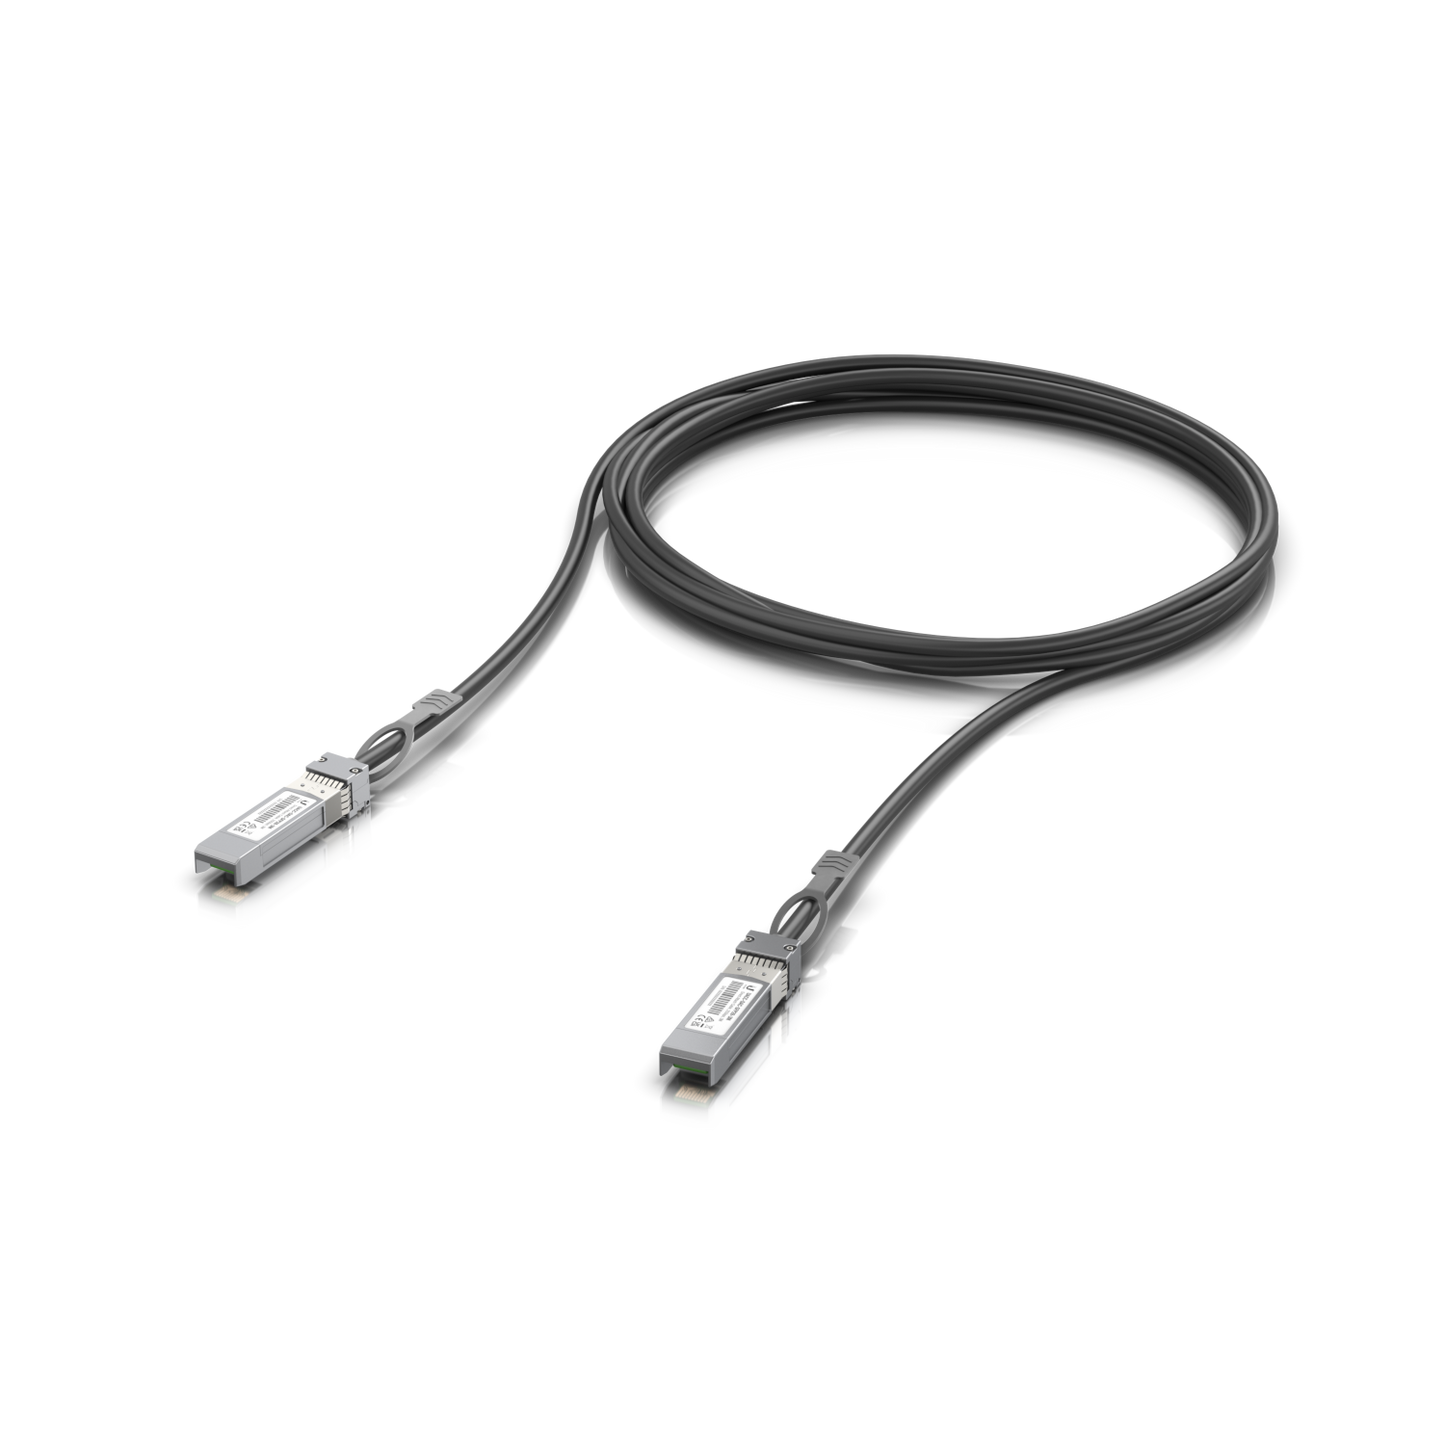 Ubiquiti 25 Gbps Direct Attach Cable